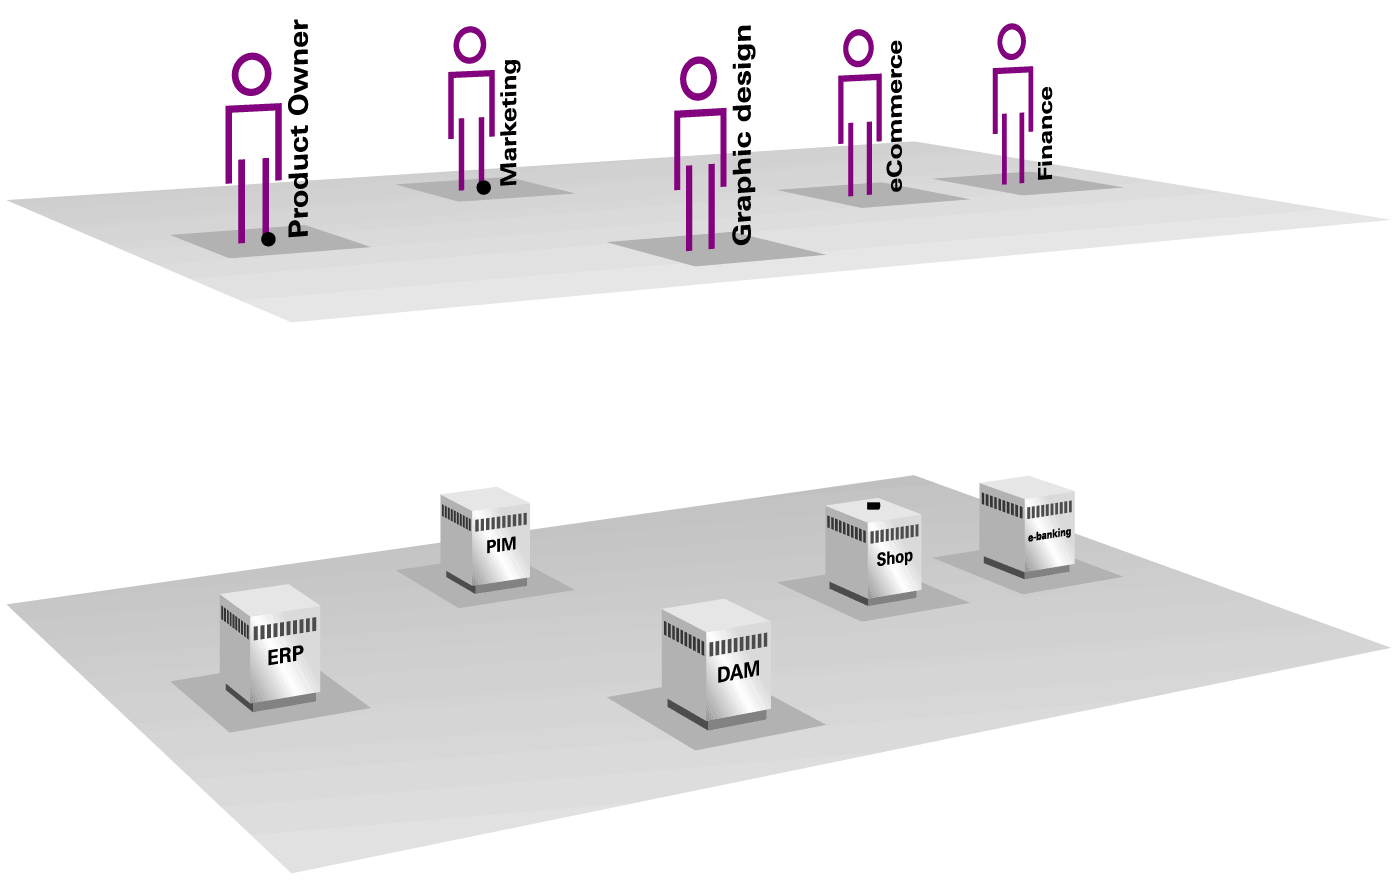 Communication between users and systems before and after using a BPM system